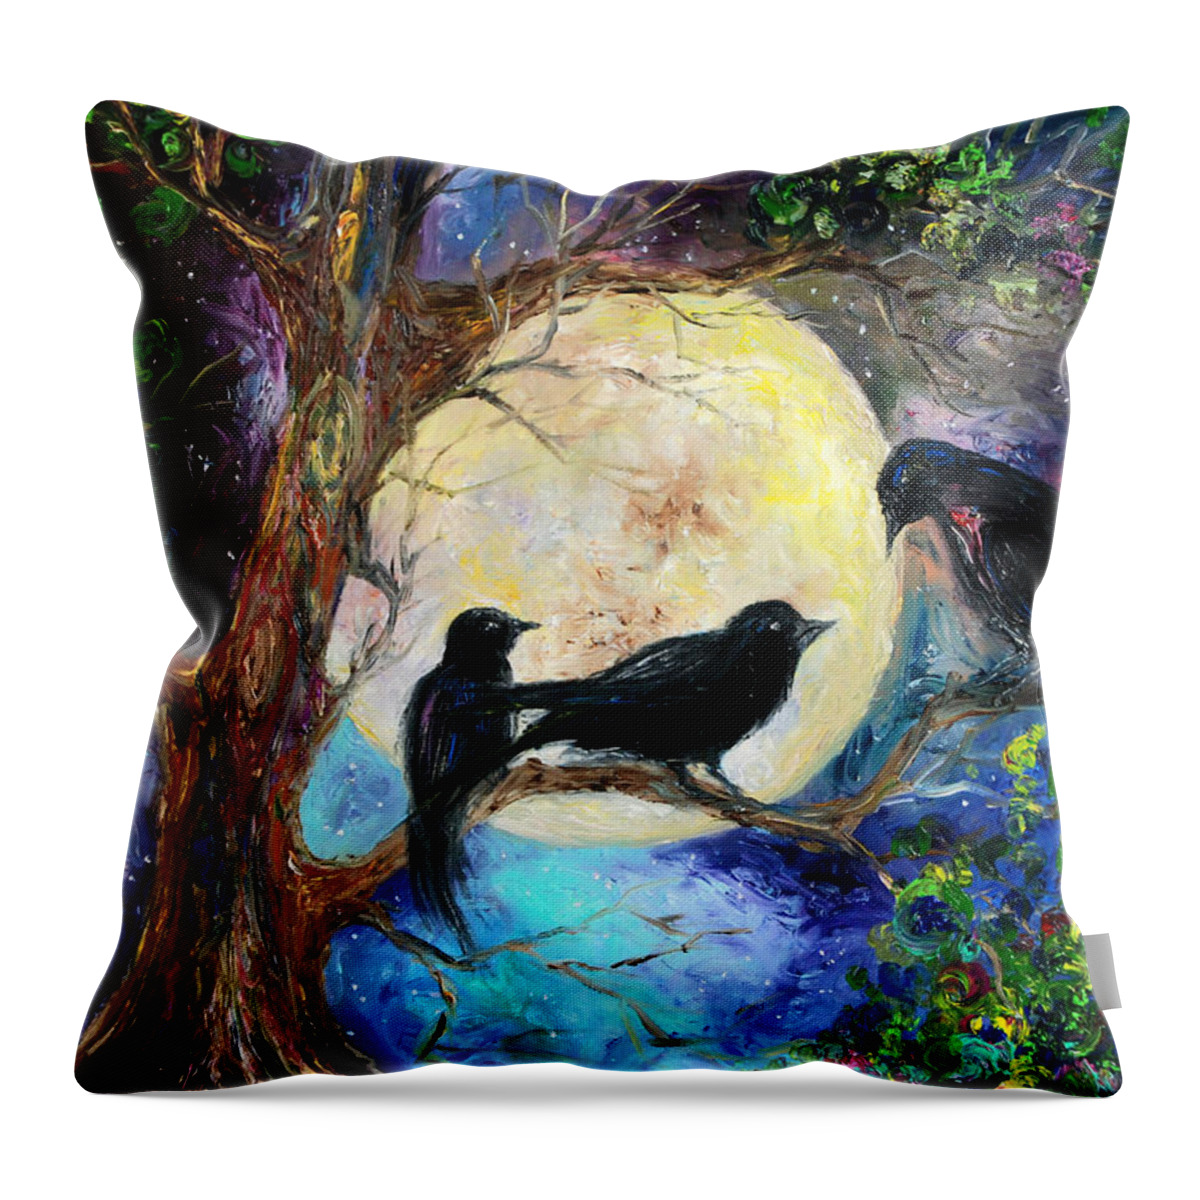 Starrynight Throw Pillow featuring the painting The conversation by Hafsa Idrees